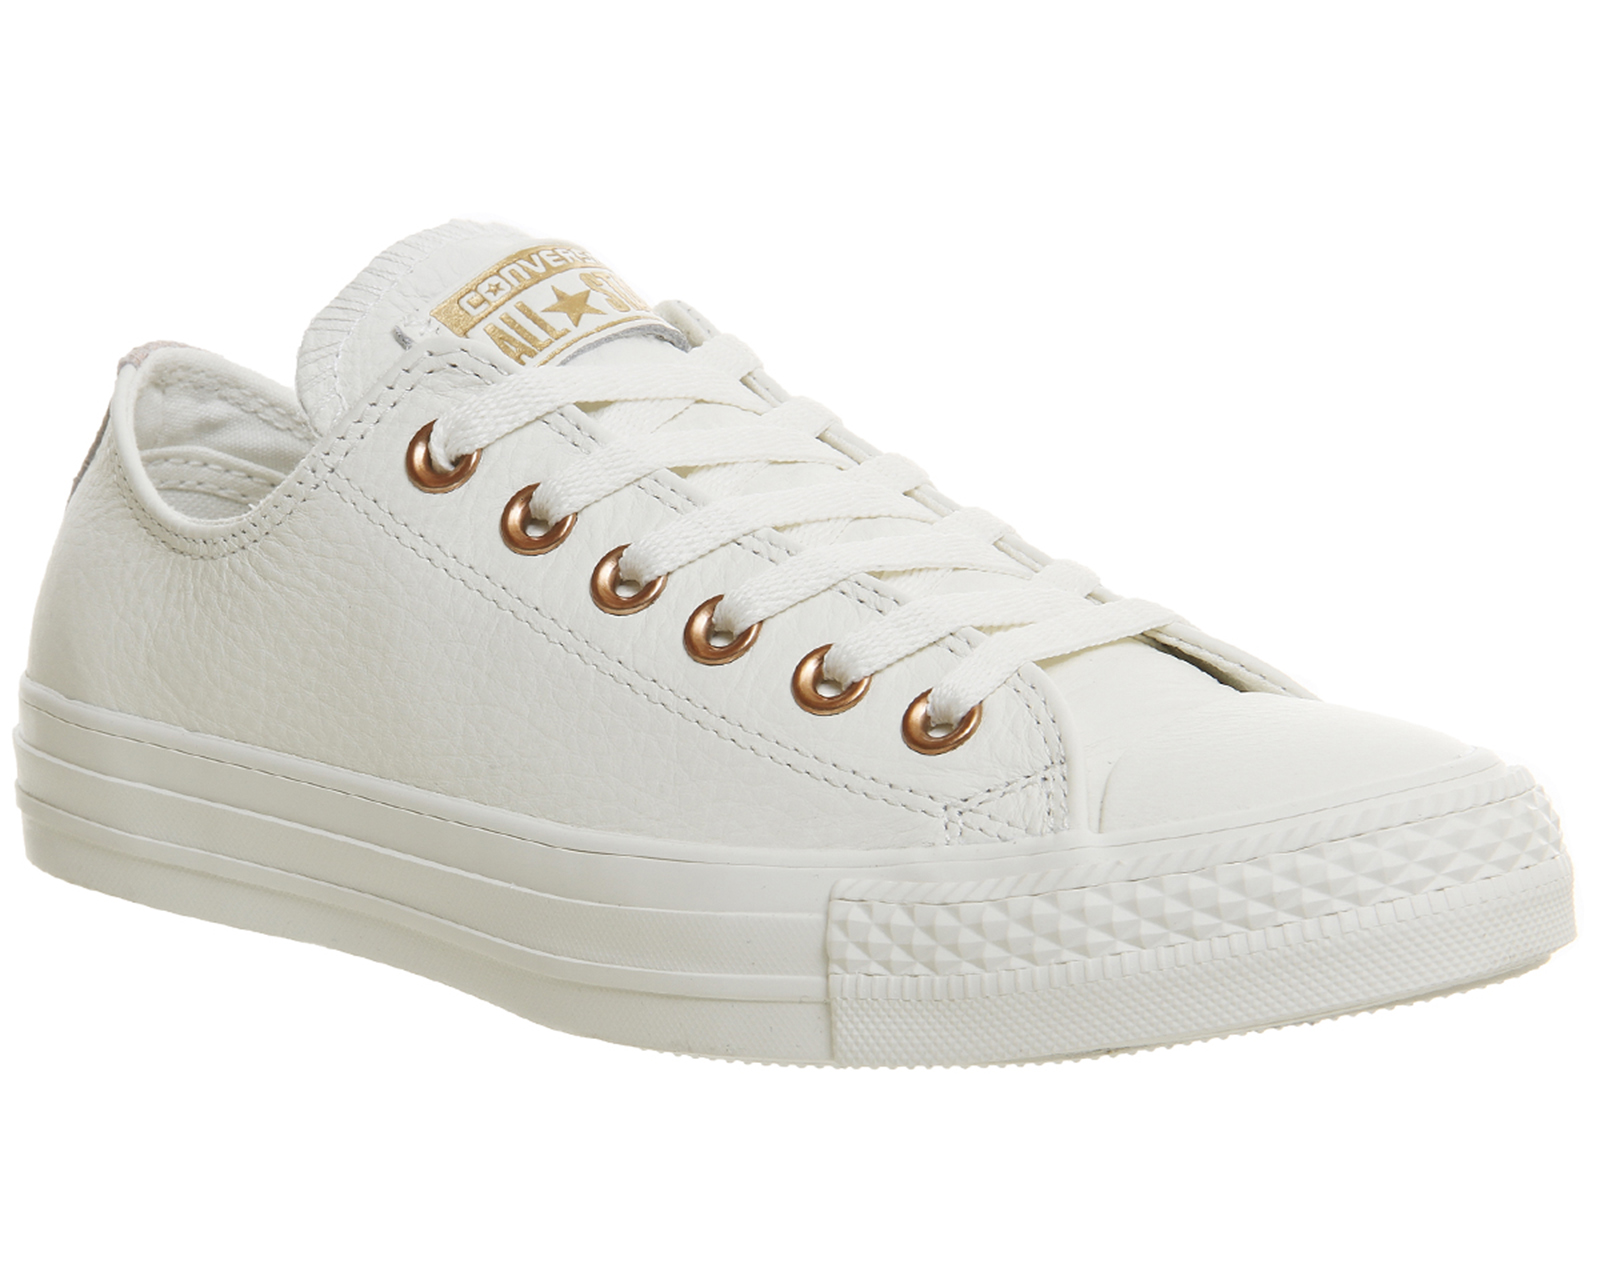 white leather converse rose gold